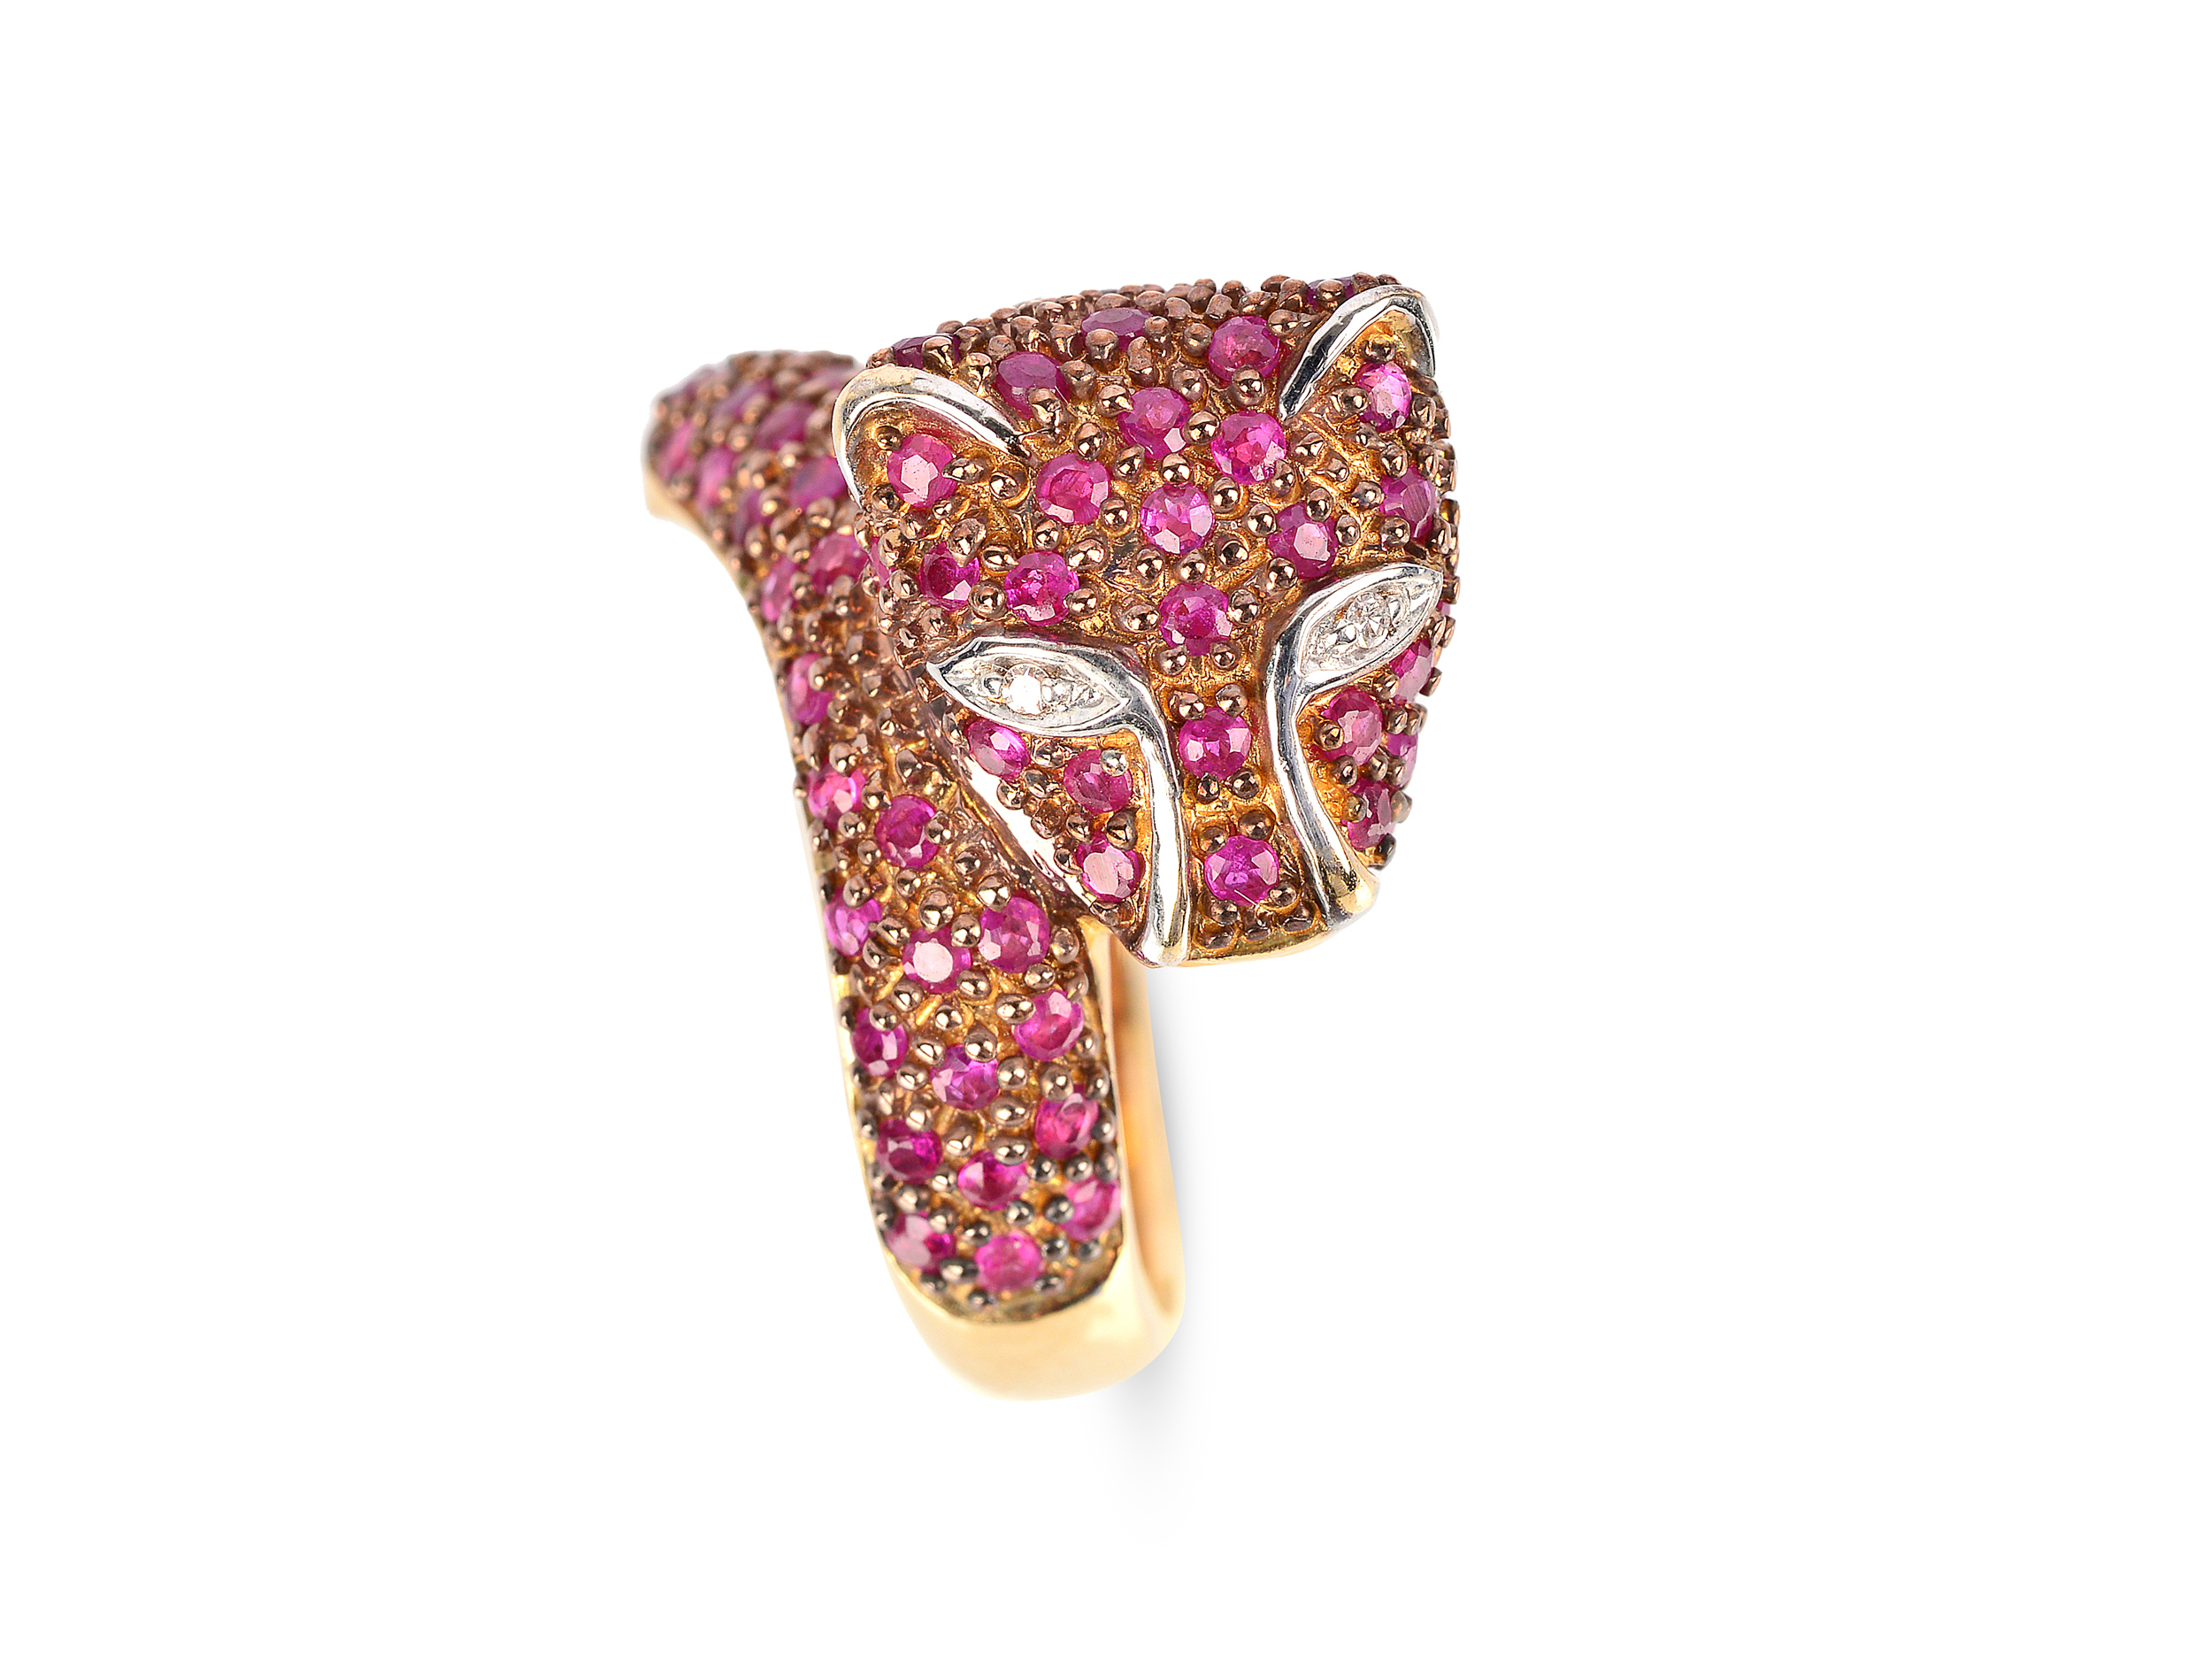 Ring in the shape of a panther, 14kt gold, Red coloured stones (rubies?) - Image 3 of 3